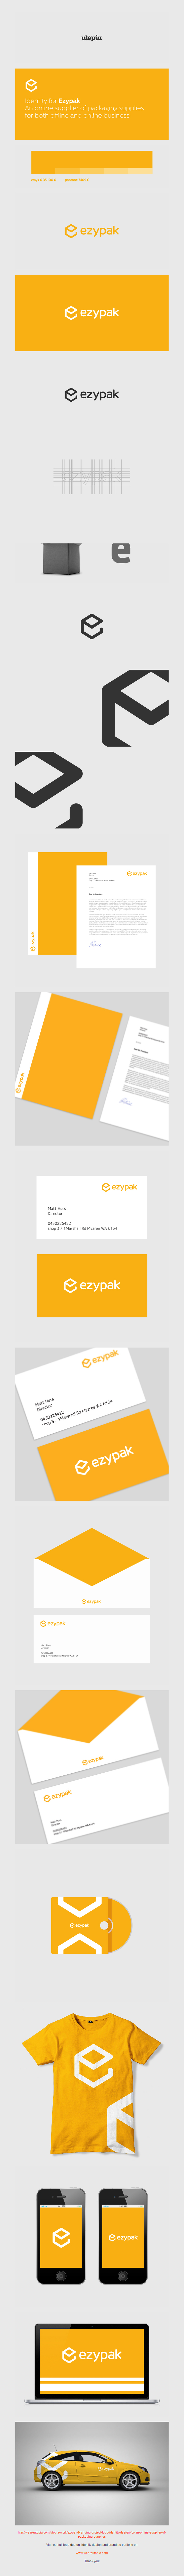 Ezypak logo and corporate identity design by Utopia Branding Agency1 Ezypak logo and corporate identity design by Utopia Branding Agency